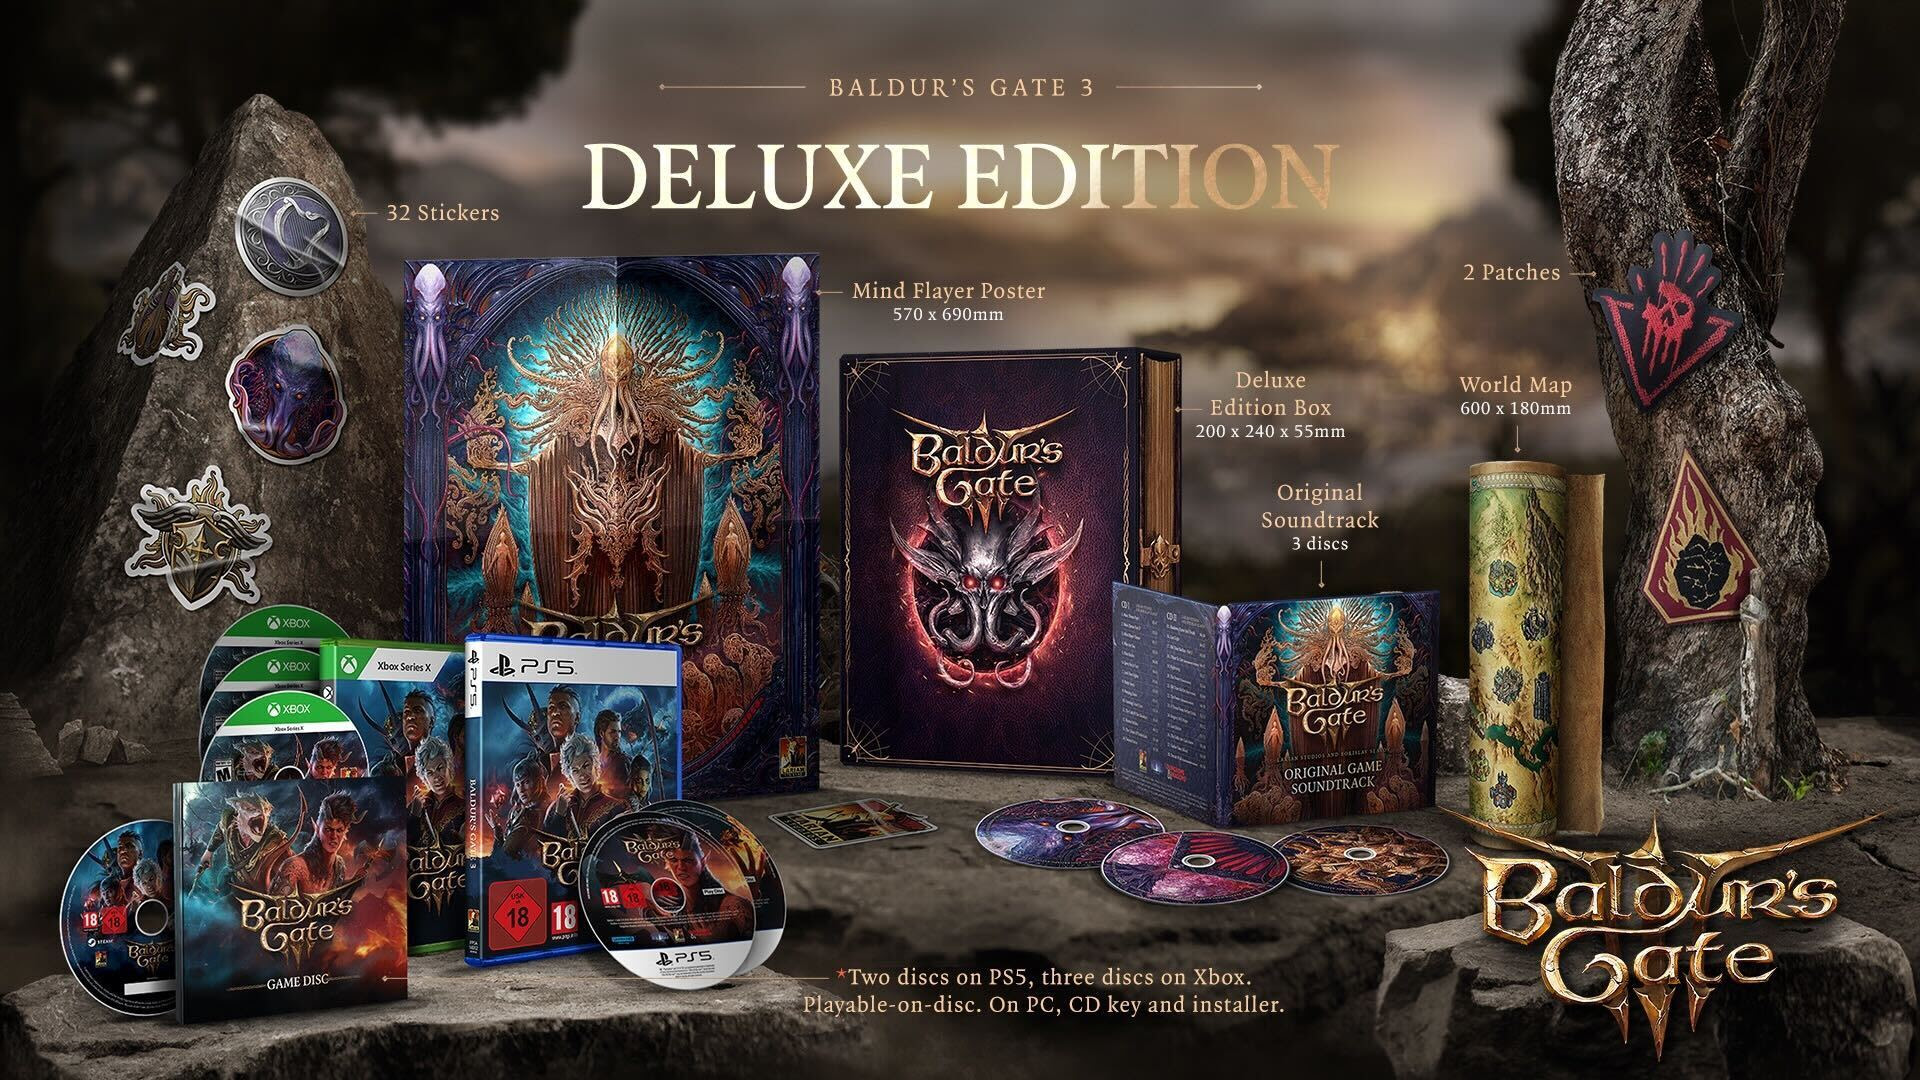 Baldur's Gate 3 Physical Deluxe Edition Includes a Map and Soundtrack